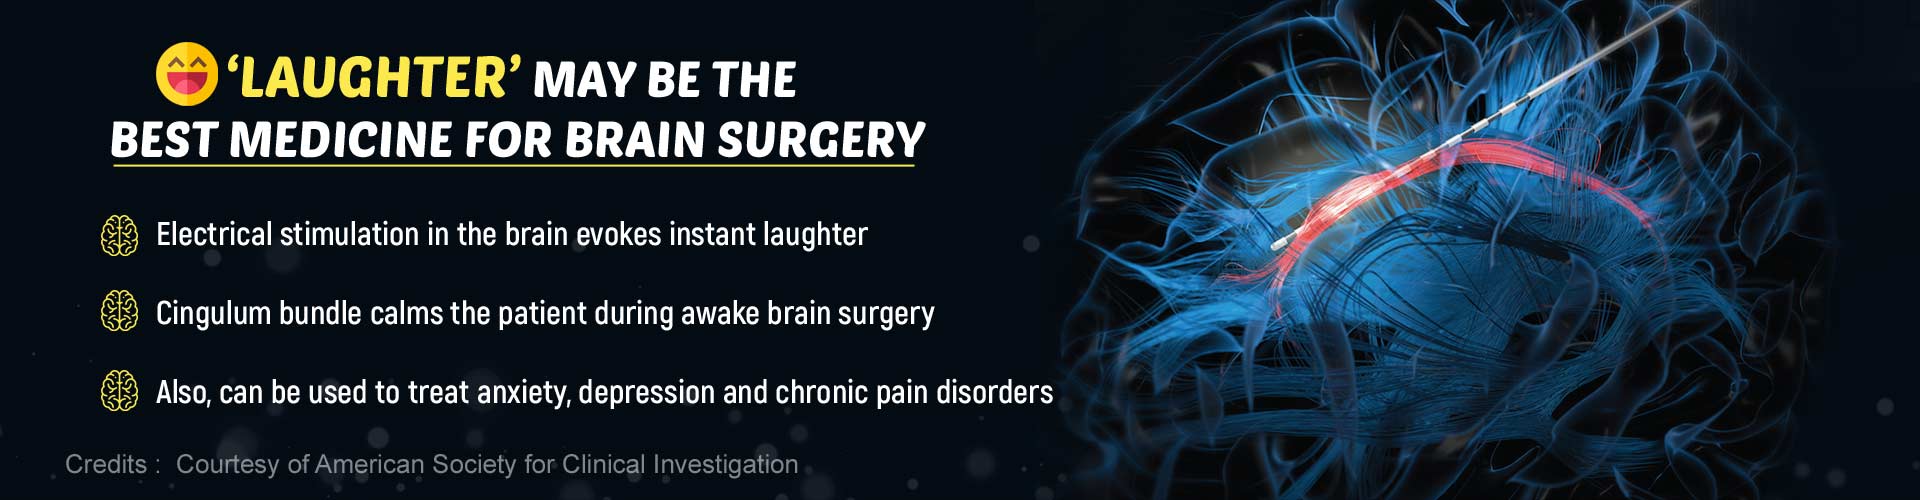 Laughter may be the best medicine for brain surgery. Electrical stimulation in the brain evokes instant laughter. Cingulum bundle calms the patient during awake brain surgery. Also, can be used to treat anxiety, depression and chronic pain disorders.